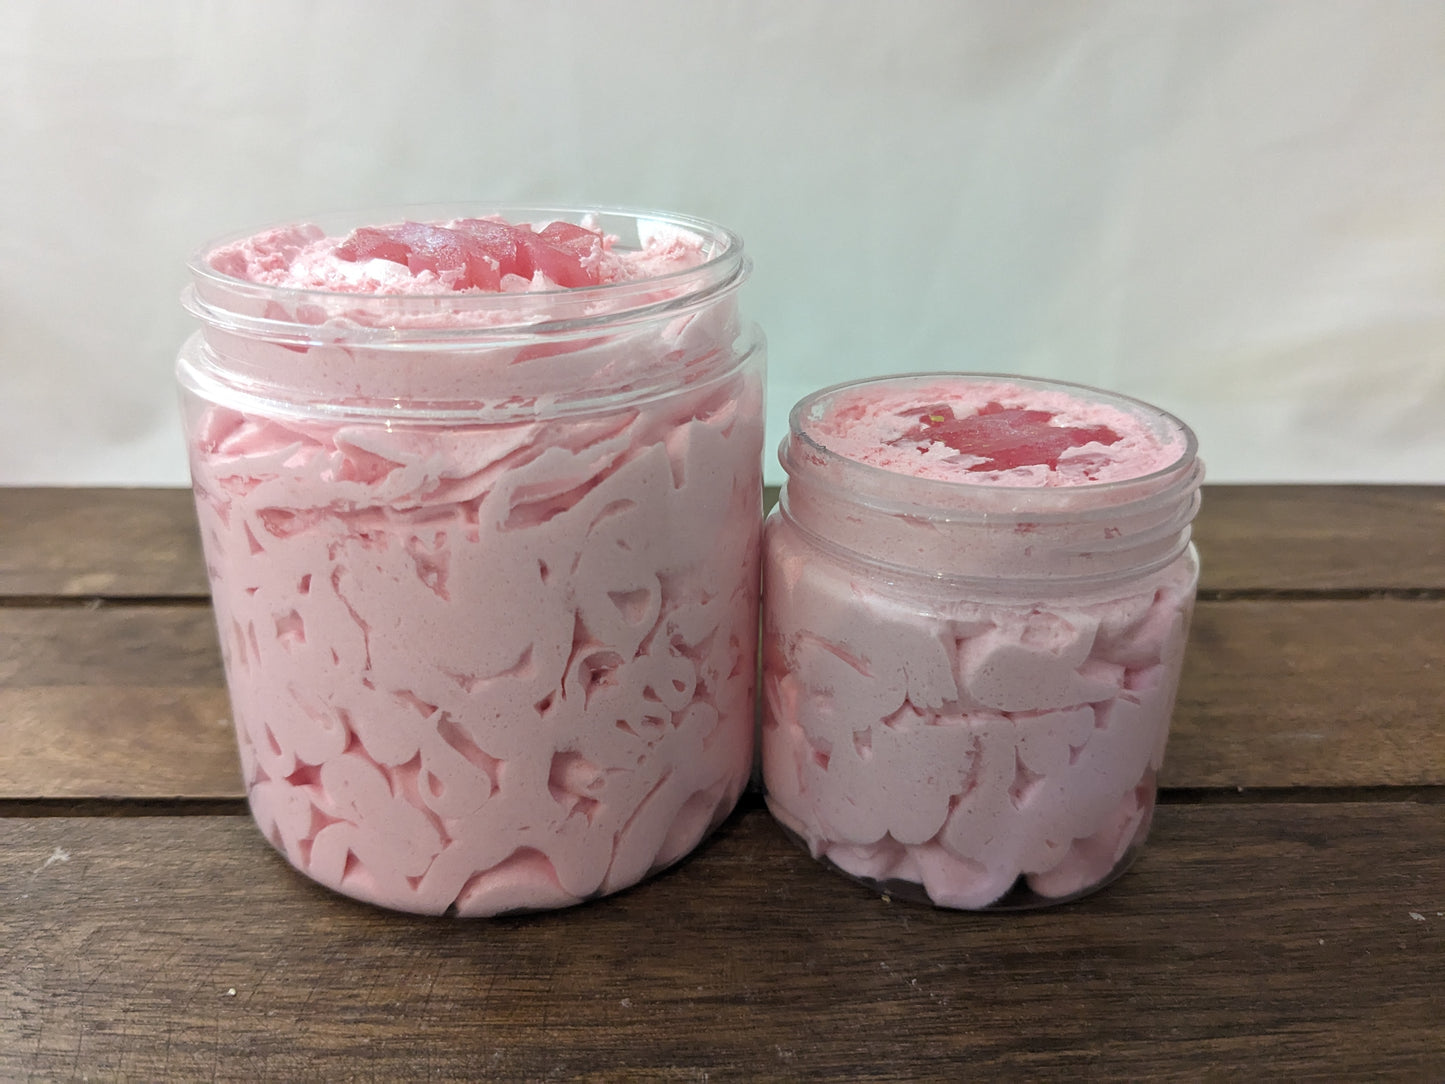 Strawberry Snowcake Whipped Soap 8oz | Pamper Your Skin